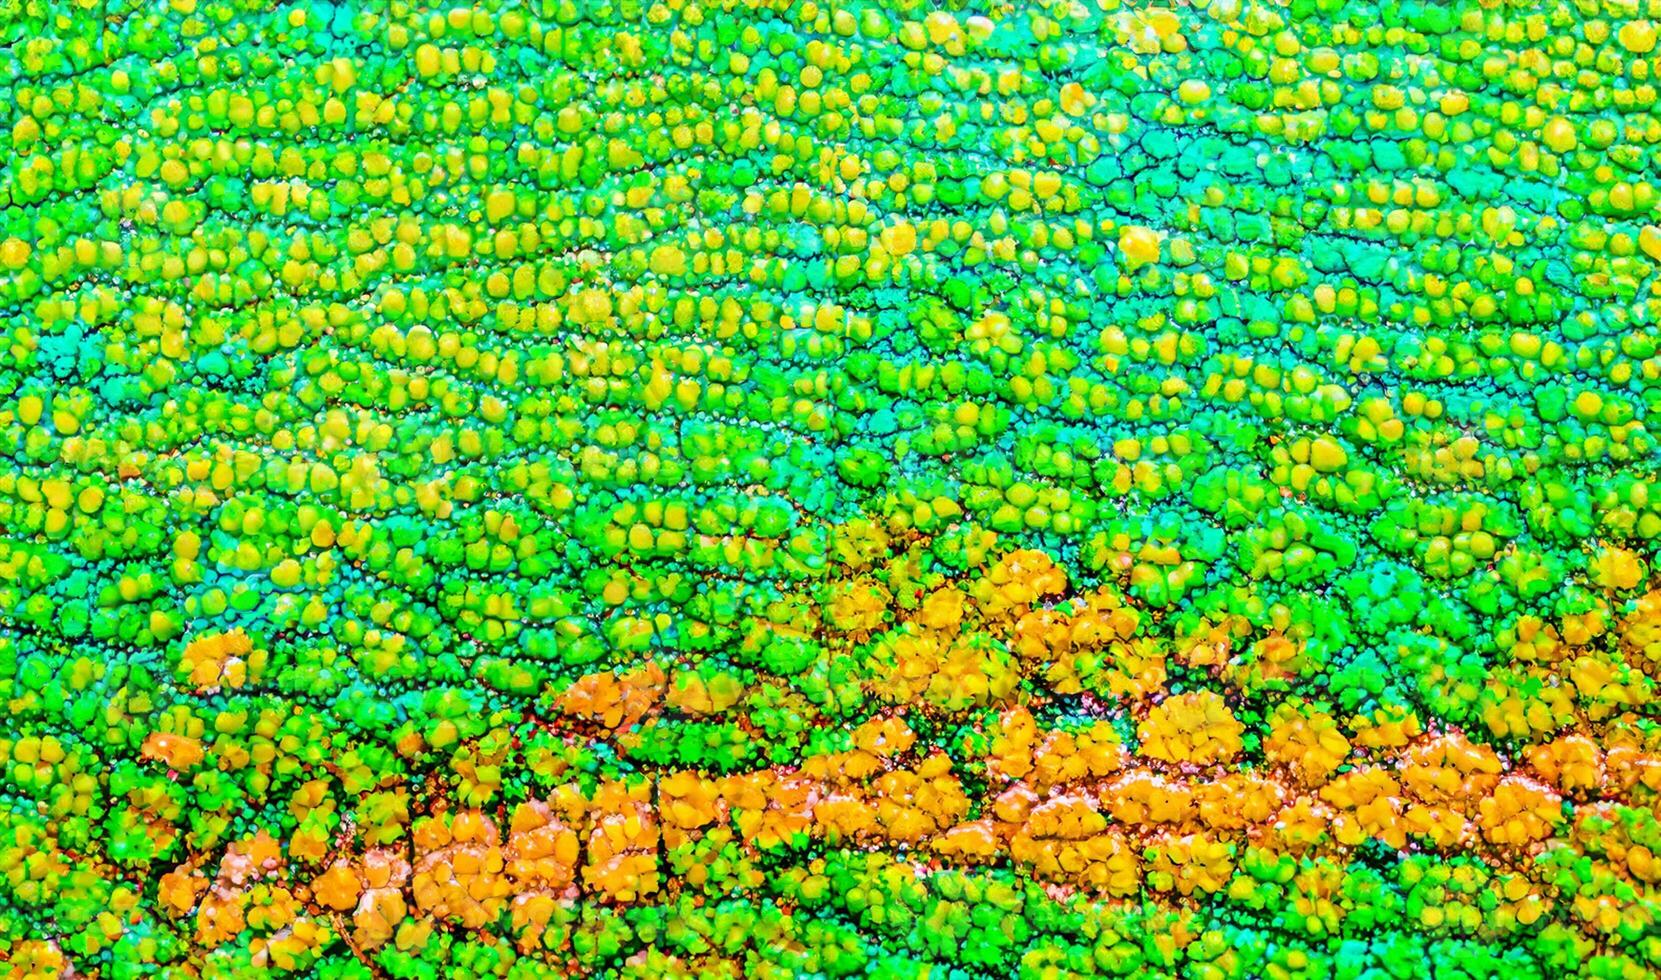 Beautiful multicolored bright chameleon skin, reptile skin pattern texture multicolored close-up as a background. photo